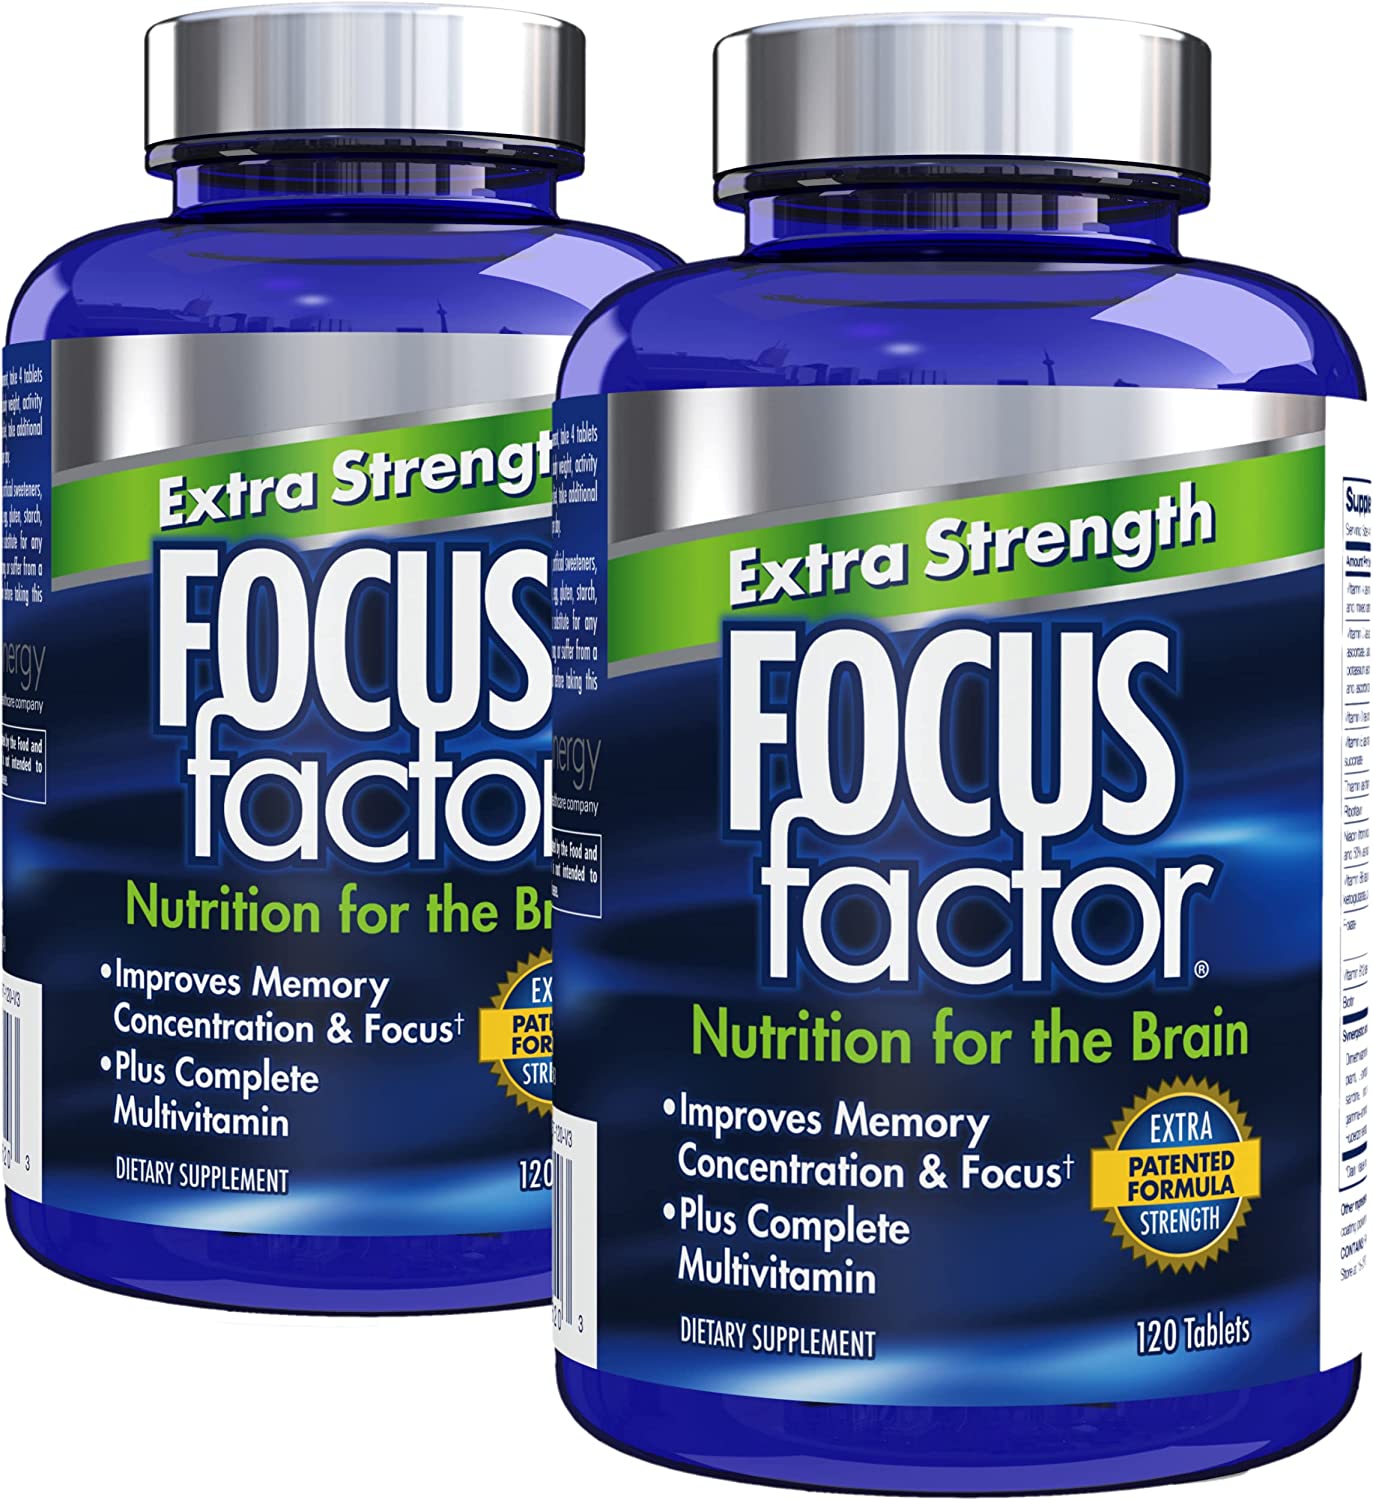 Focus Factor Extra Strength - Nutrition for the Brain 120 Tablets (2 Pack)